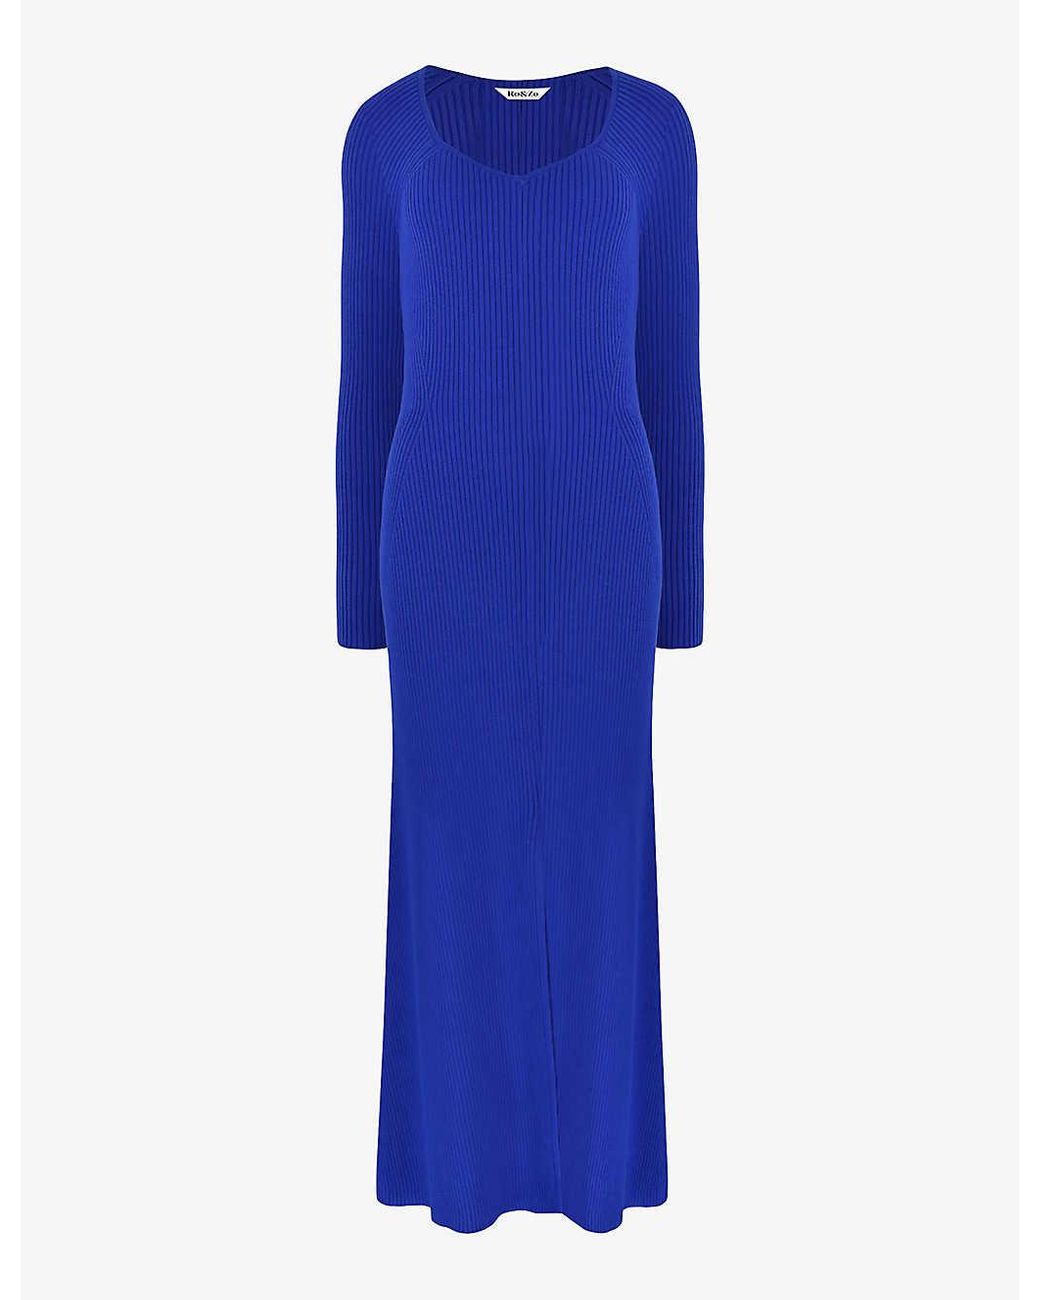 Ro&zo Sweetheart-neck Ribbed Stretch-knit Midi Dress in Blue | Lyst UK